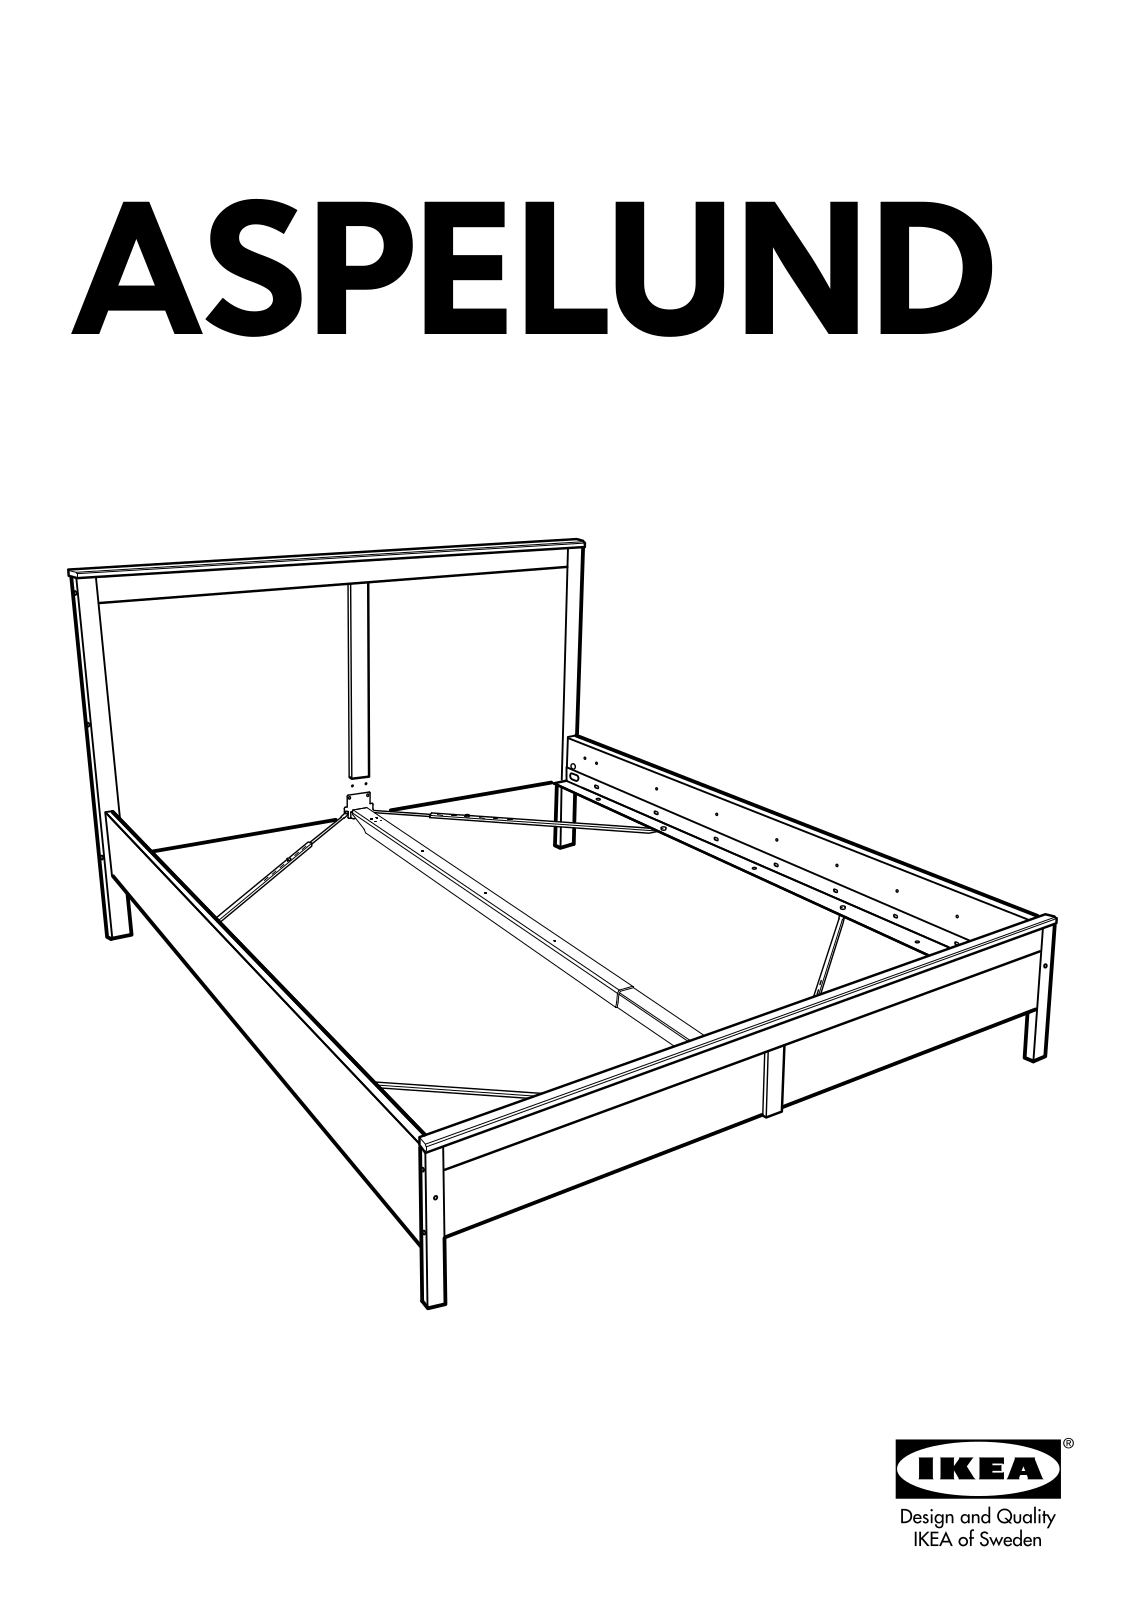 IKEA ASPELUND BED FRAME QUEEN Assembly Instruction